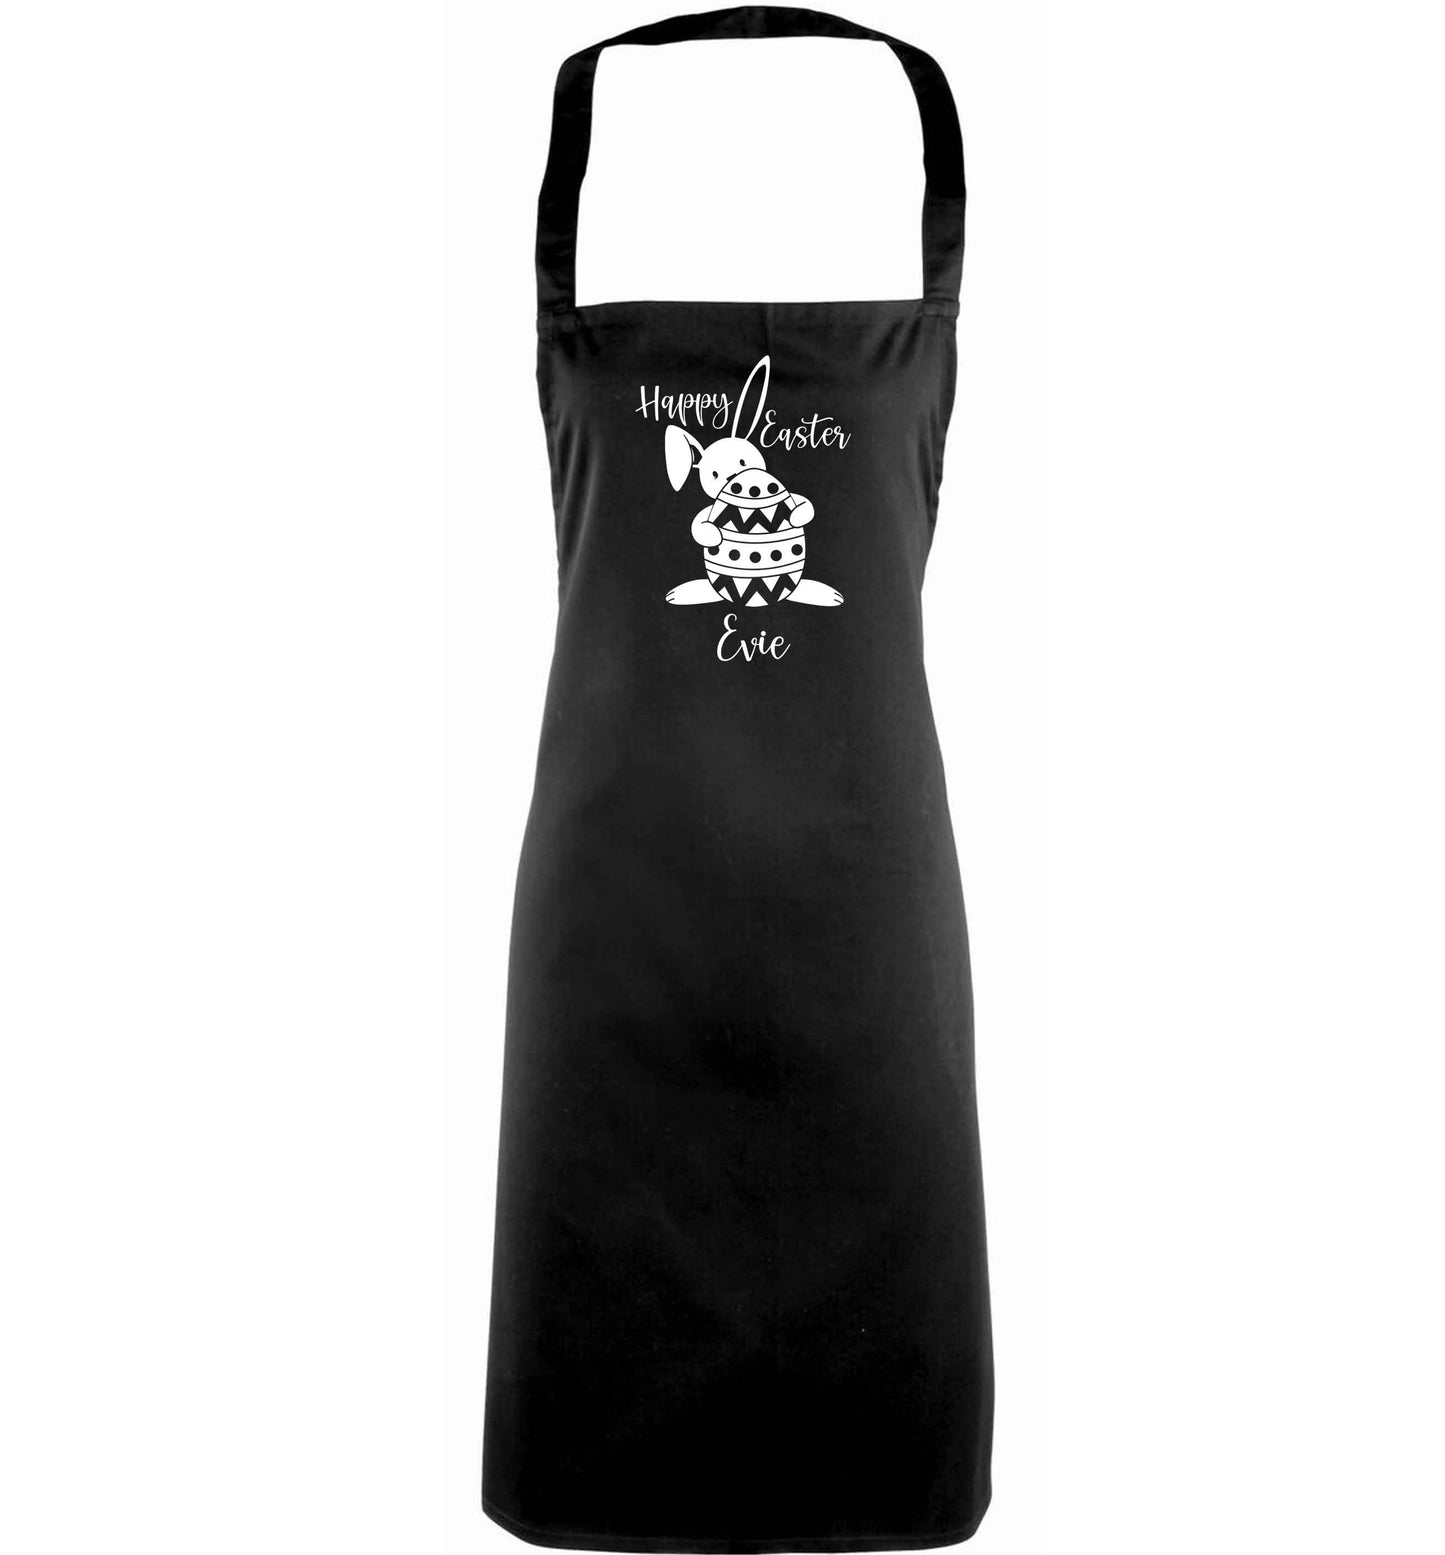 Happy Easter - personalised adults black apron